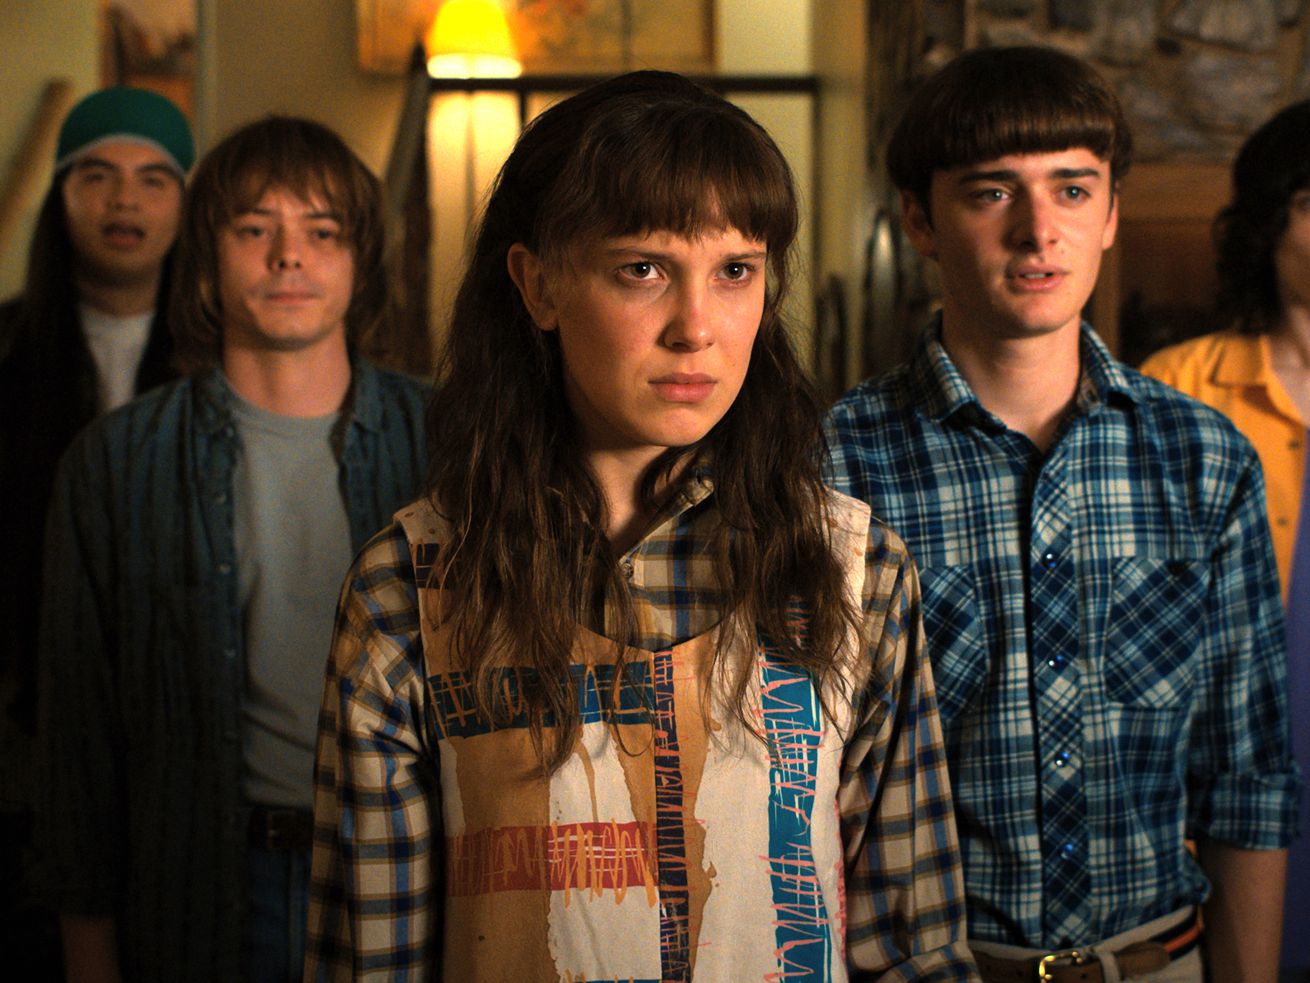 Eduardo Franco as Argyle, Charlie Heaton as Jonathan, Millie Bobby Brown as Eleven, Noah Schnapp as Will Byers, and Finn Wolfhard as Mike Wheeler in Stranger Things.